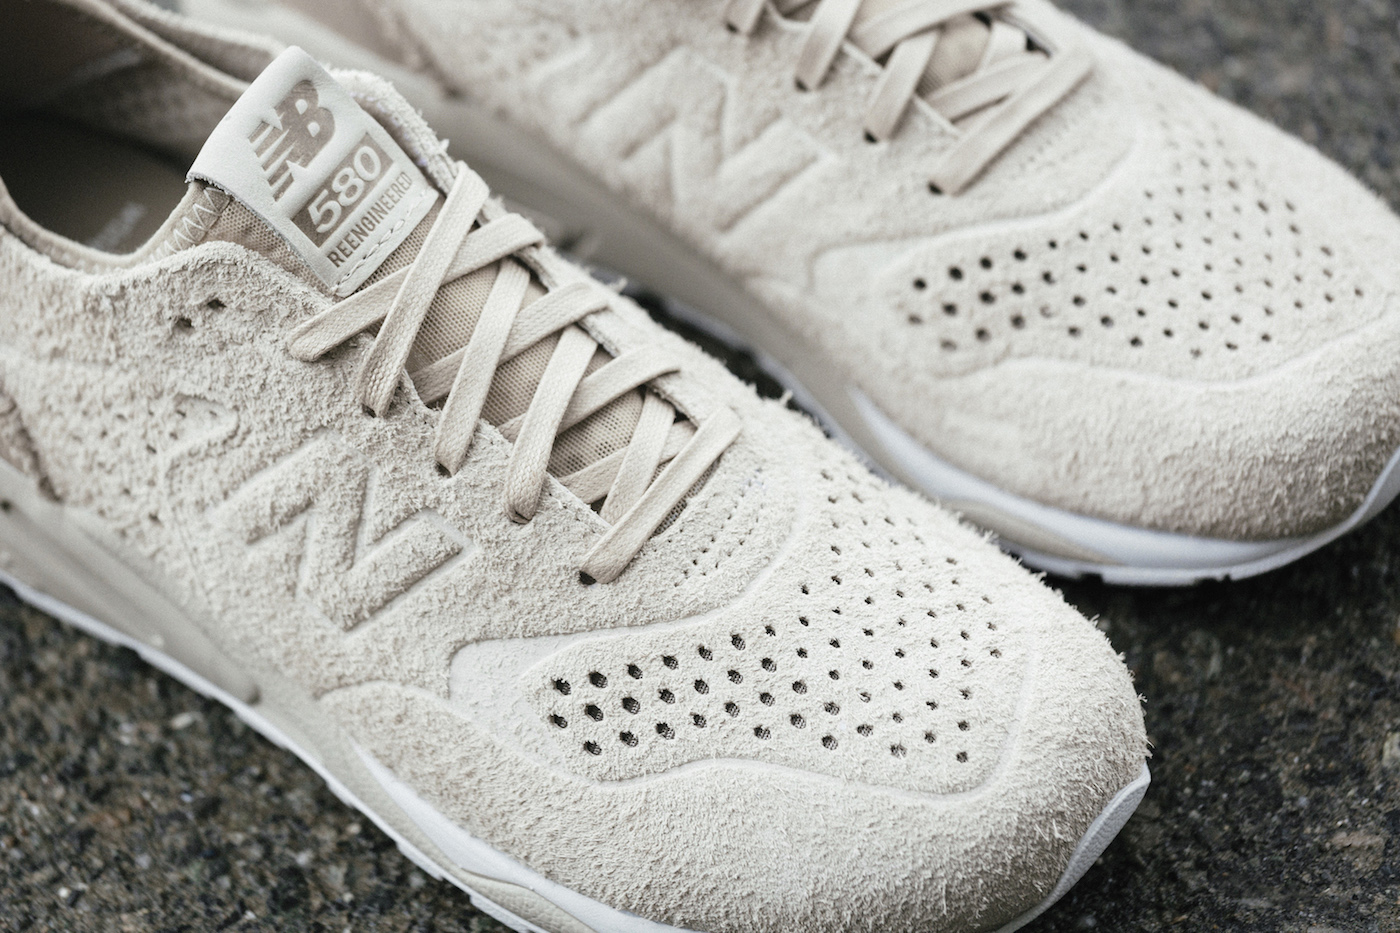 wings+horns x New Balance 580 Deconstructed-3